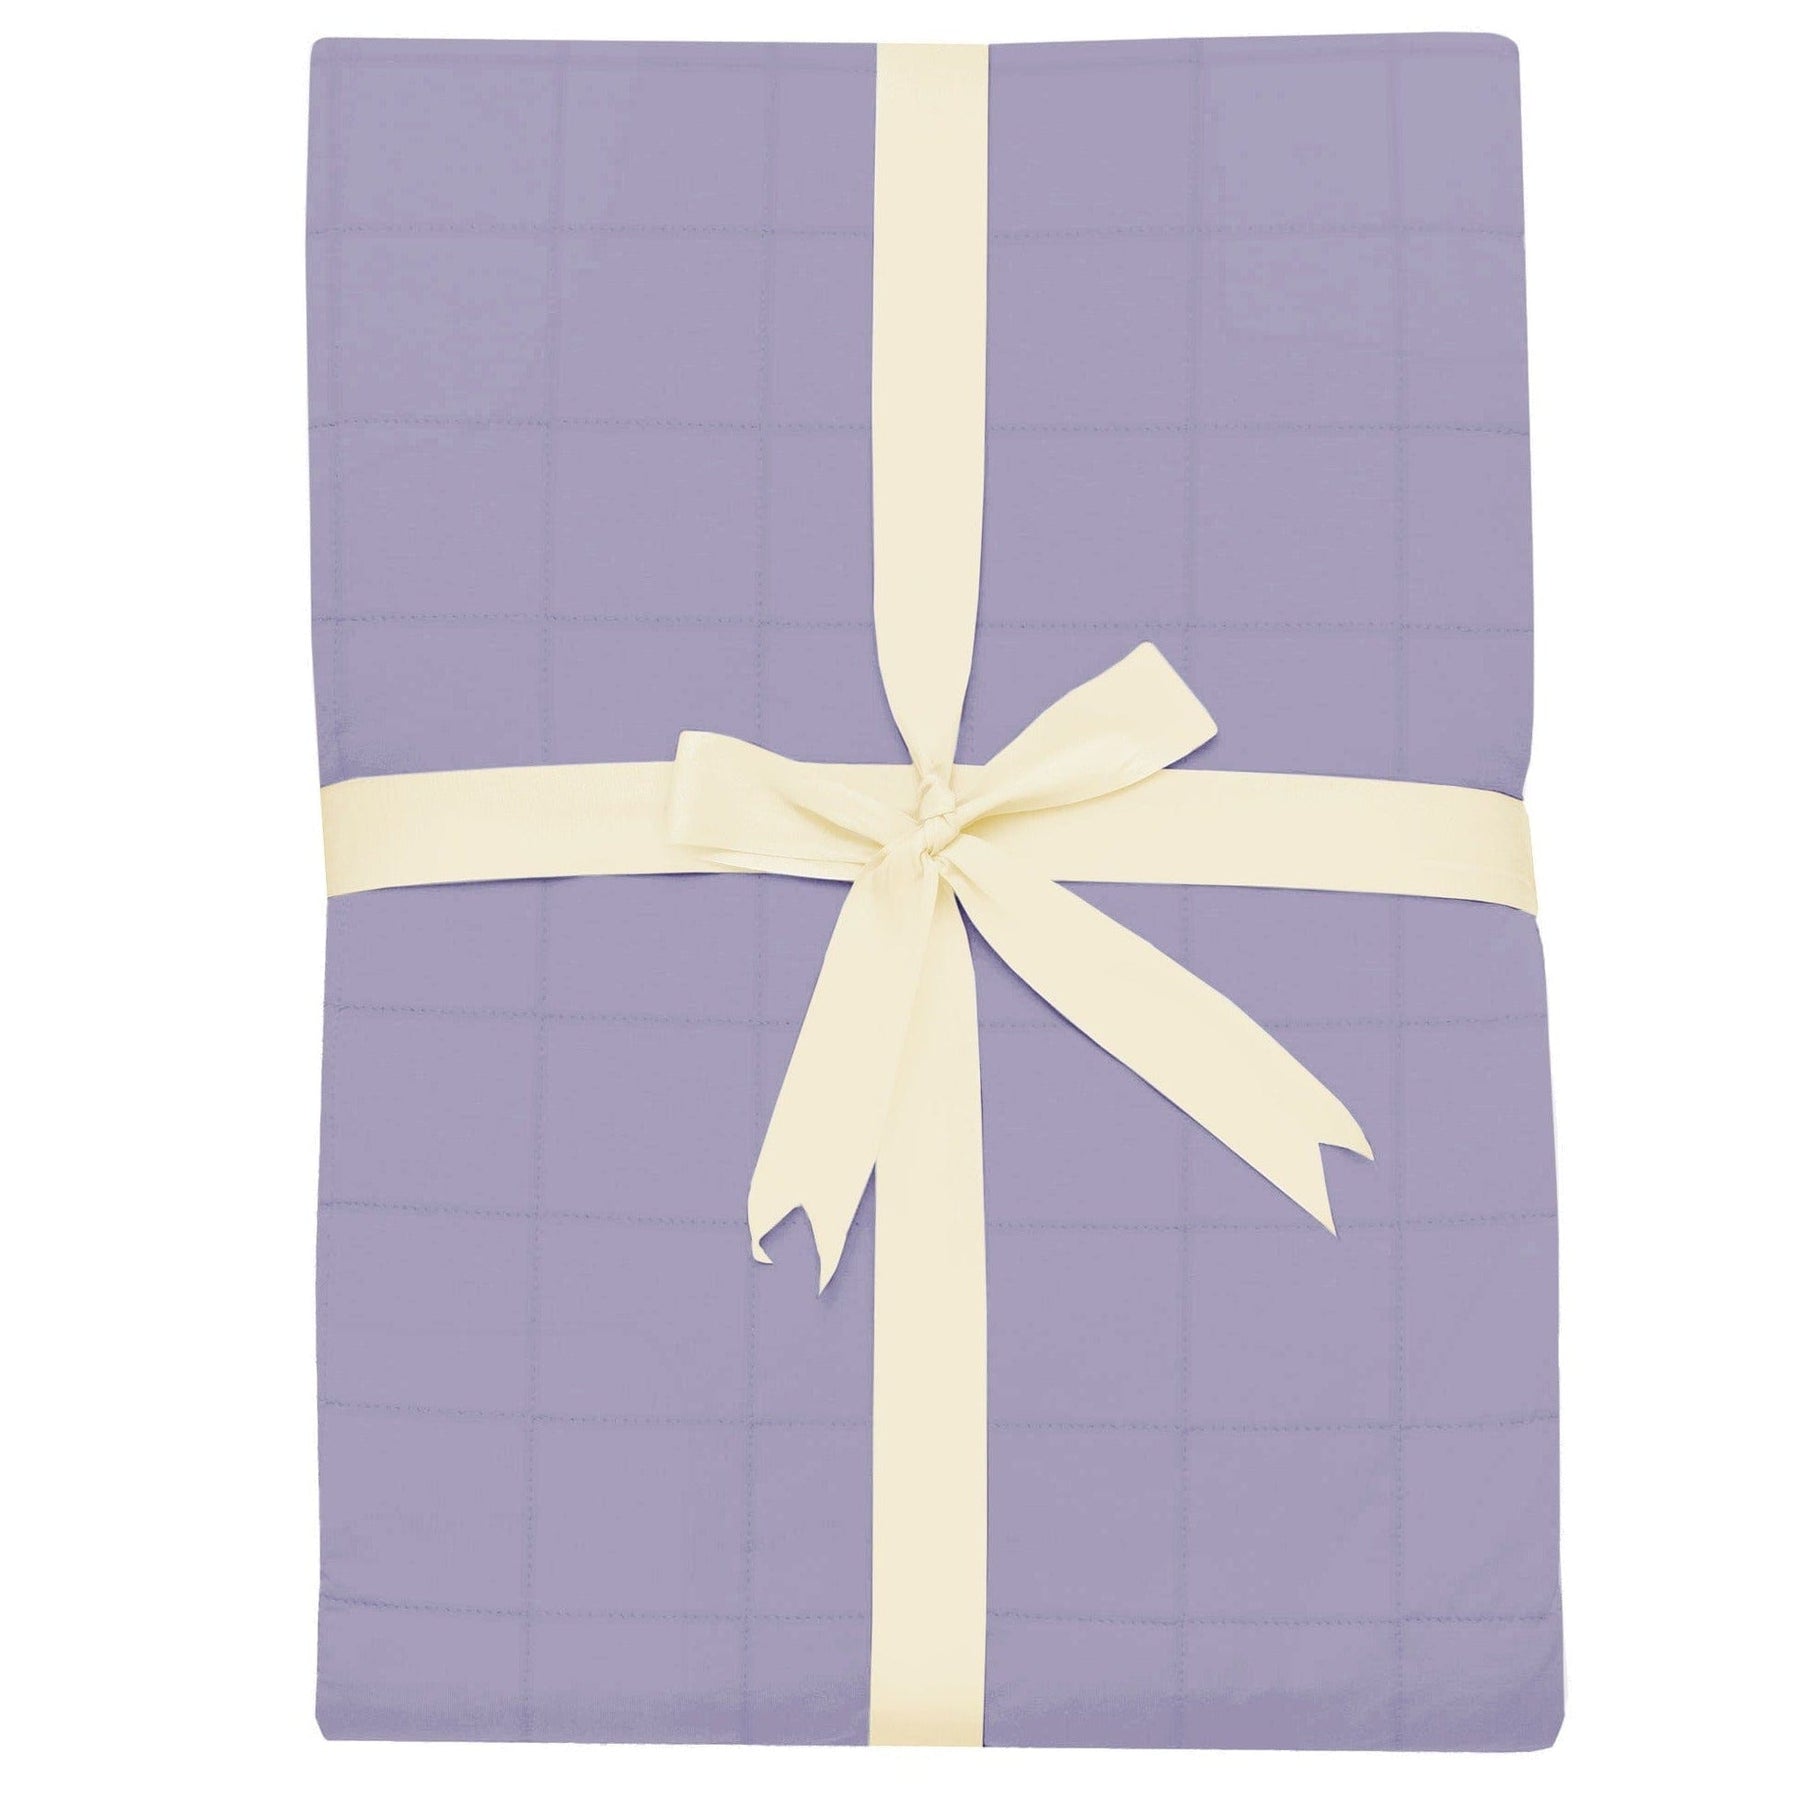 Kyte BABY Adult Blanket 1.0 Taro / Adult Adult Quilted Blanket in Taro 1.0